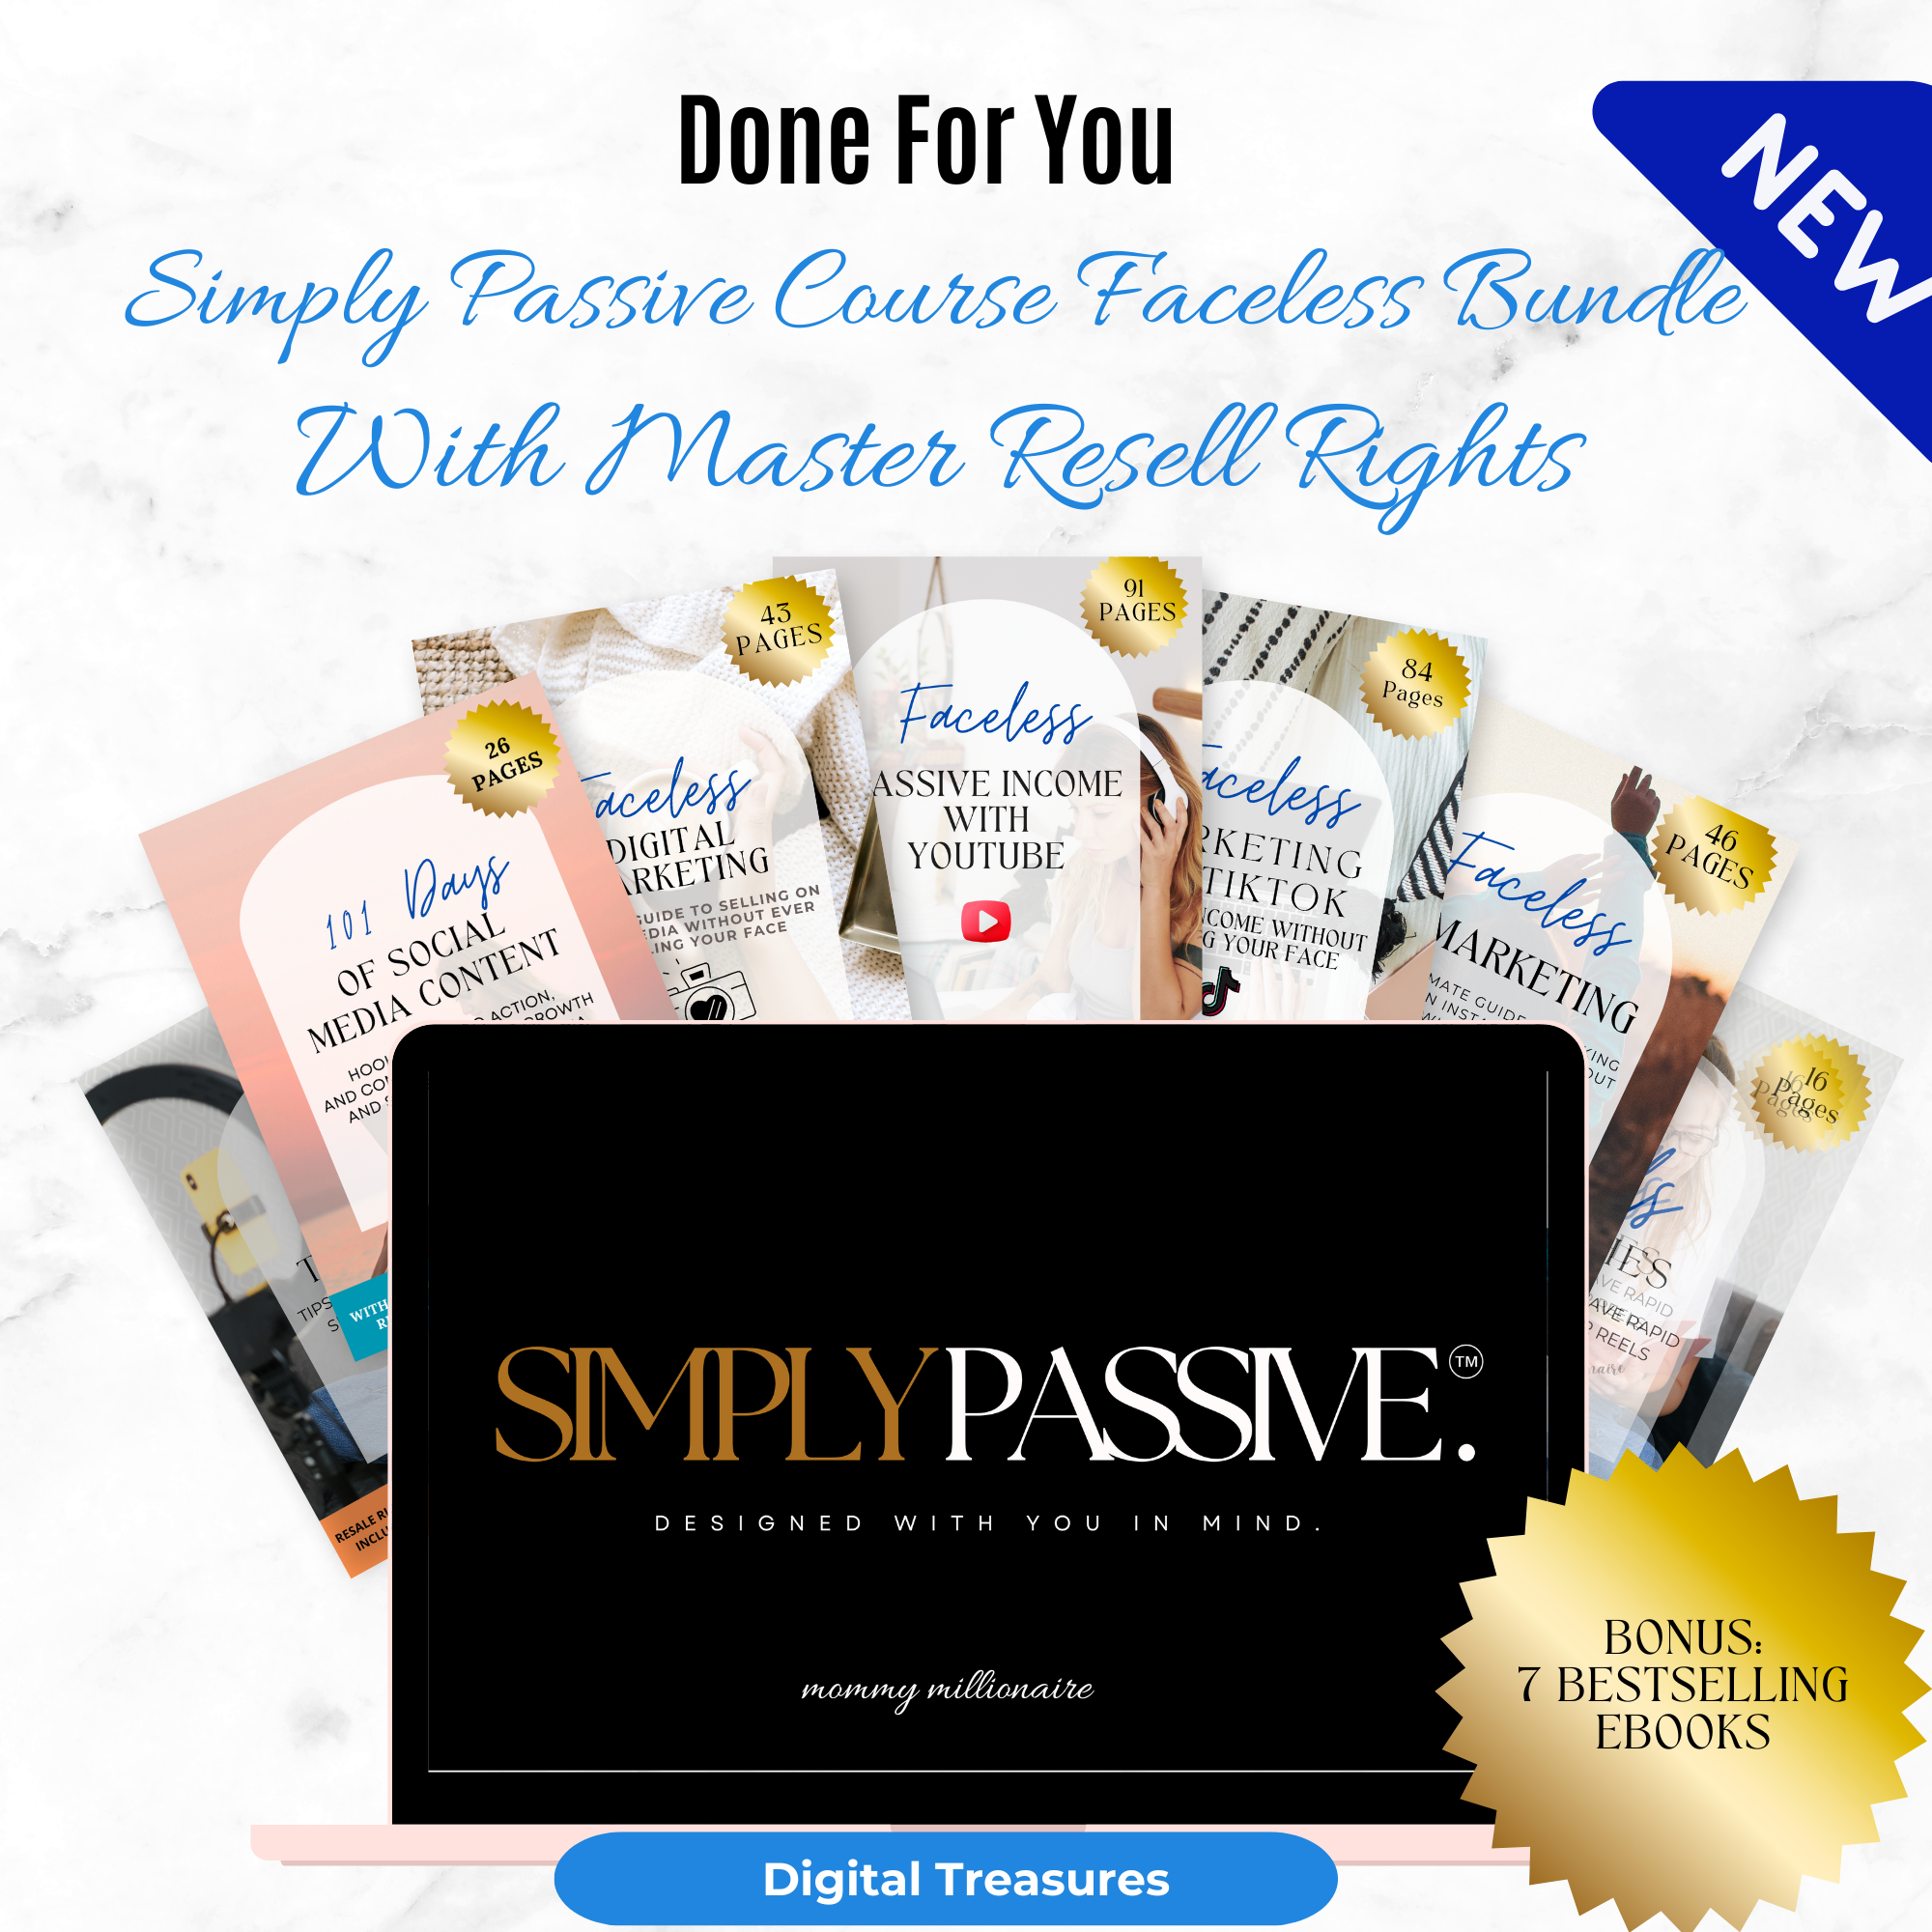 Simply Passive Digital Marketing Course with Bundle